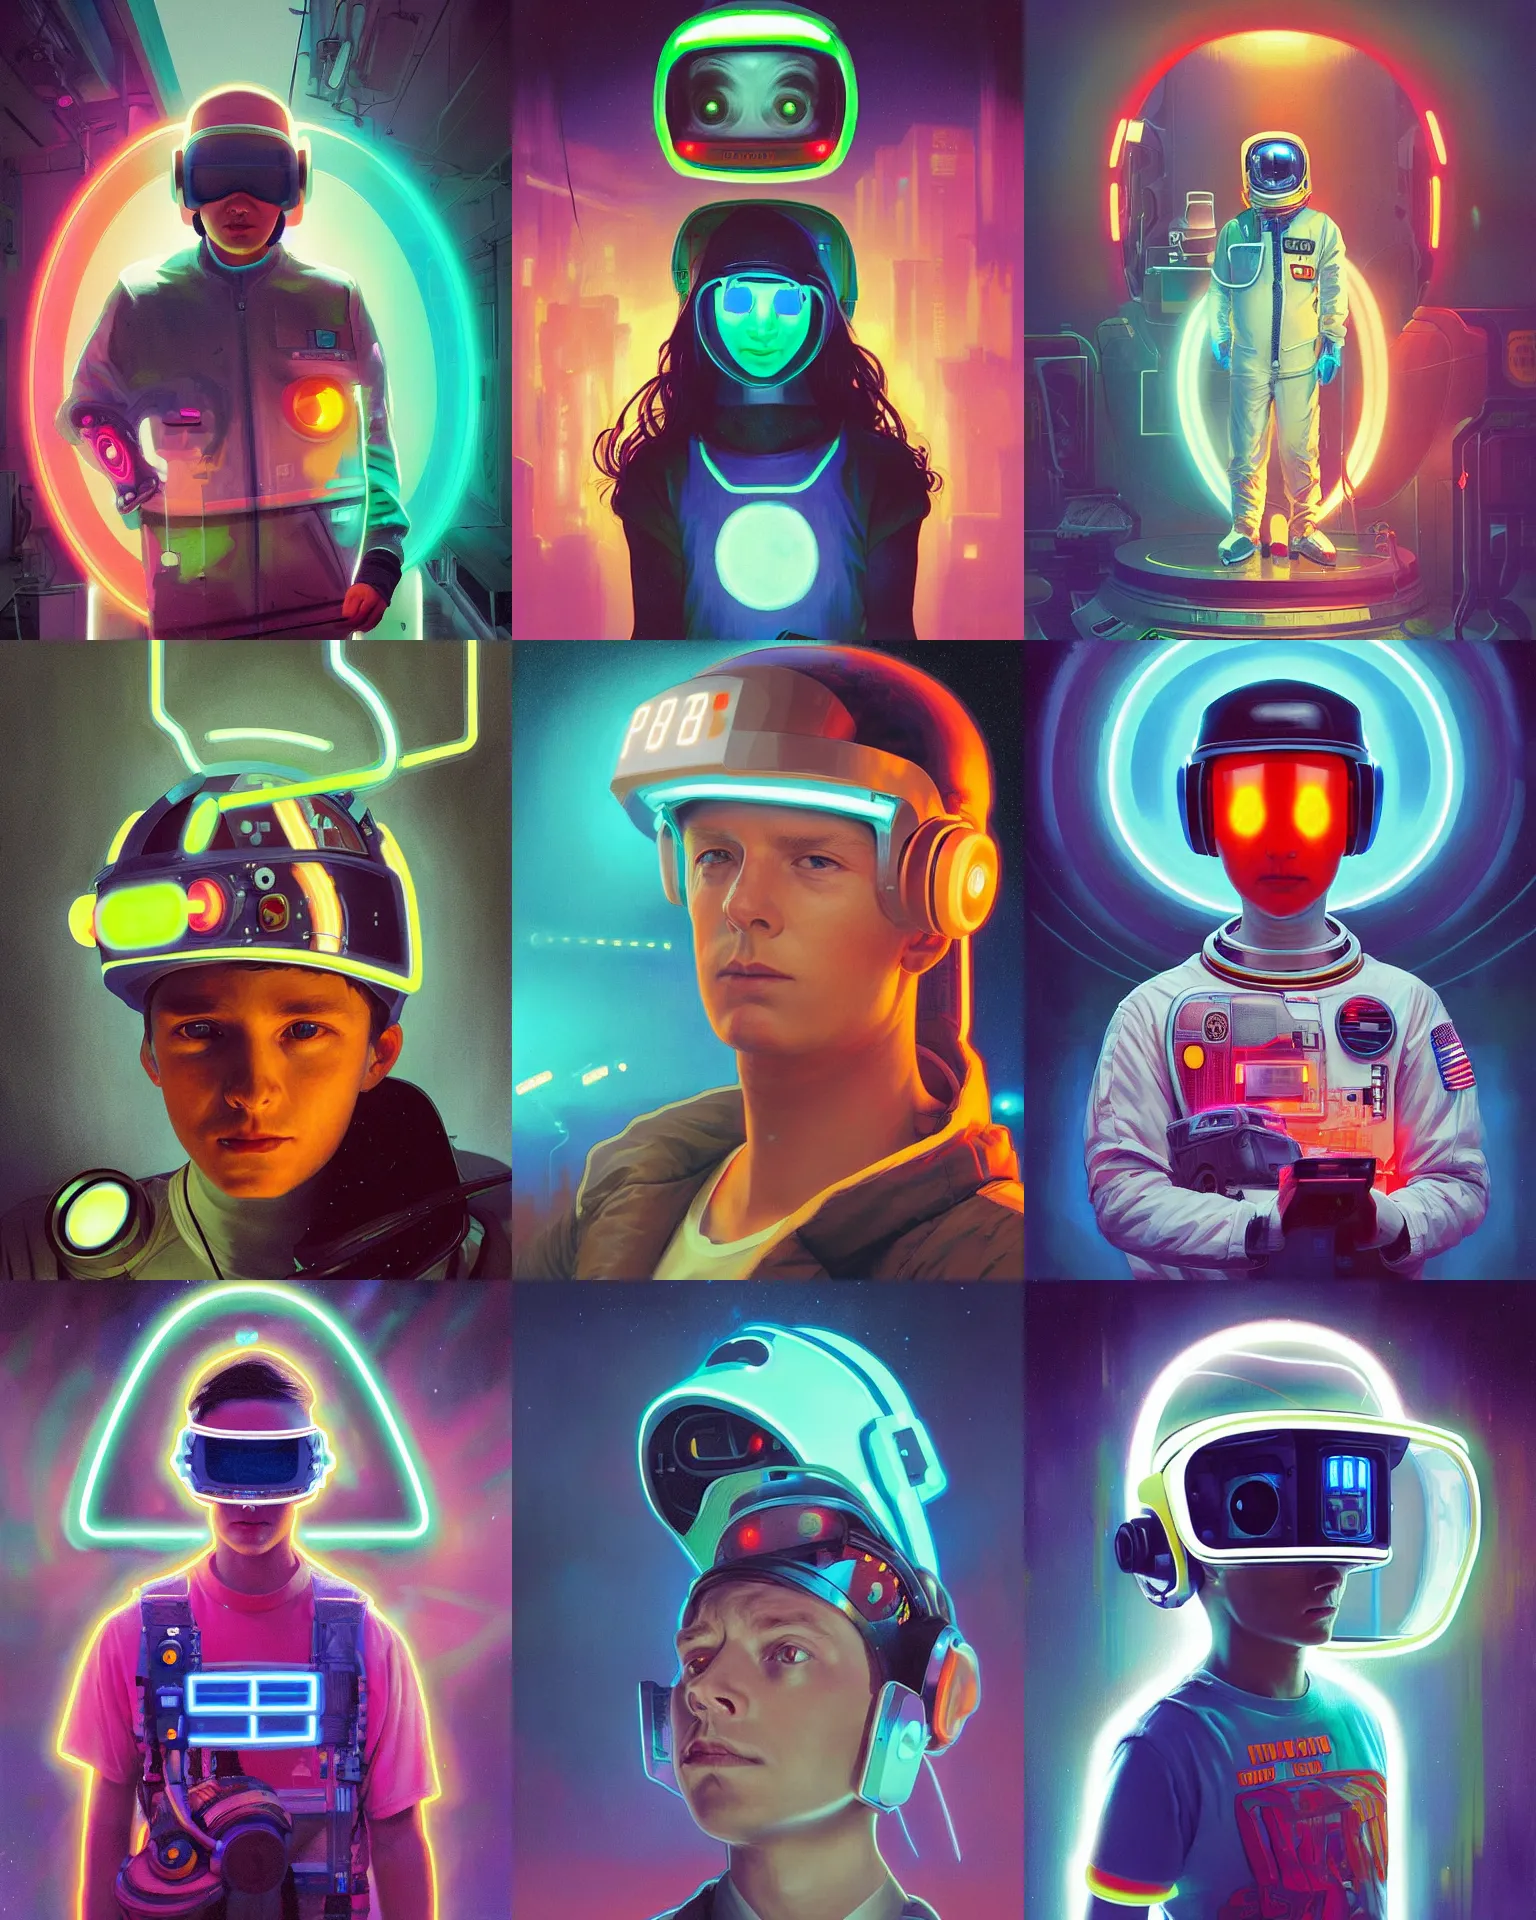 Prompt: future coder looking on, back to the future visor, electric lights and neon, rim lighting, desaturated headshot portrait painting by dean cornwall, ilya repin, rhads, tom whalen, alex grey, alphonse mucha, donoto giancola, astronaut cyberpunk electric fashion photography